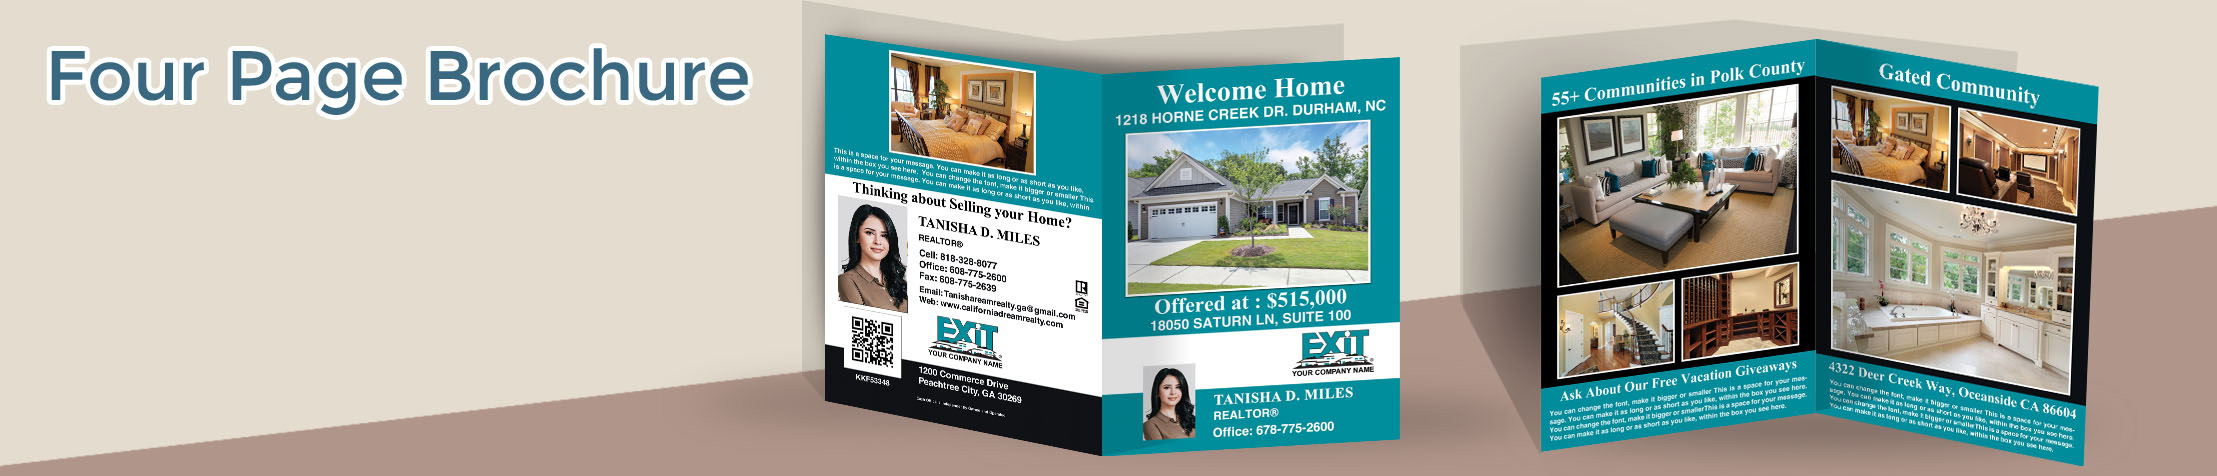 Exit Realty Real Estate Flyers and Brochures - Exit Realty approved vendor four page brochure templates for open houses and marketing | BestPrintBuy.com